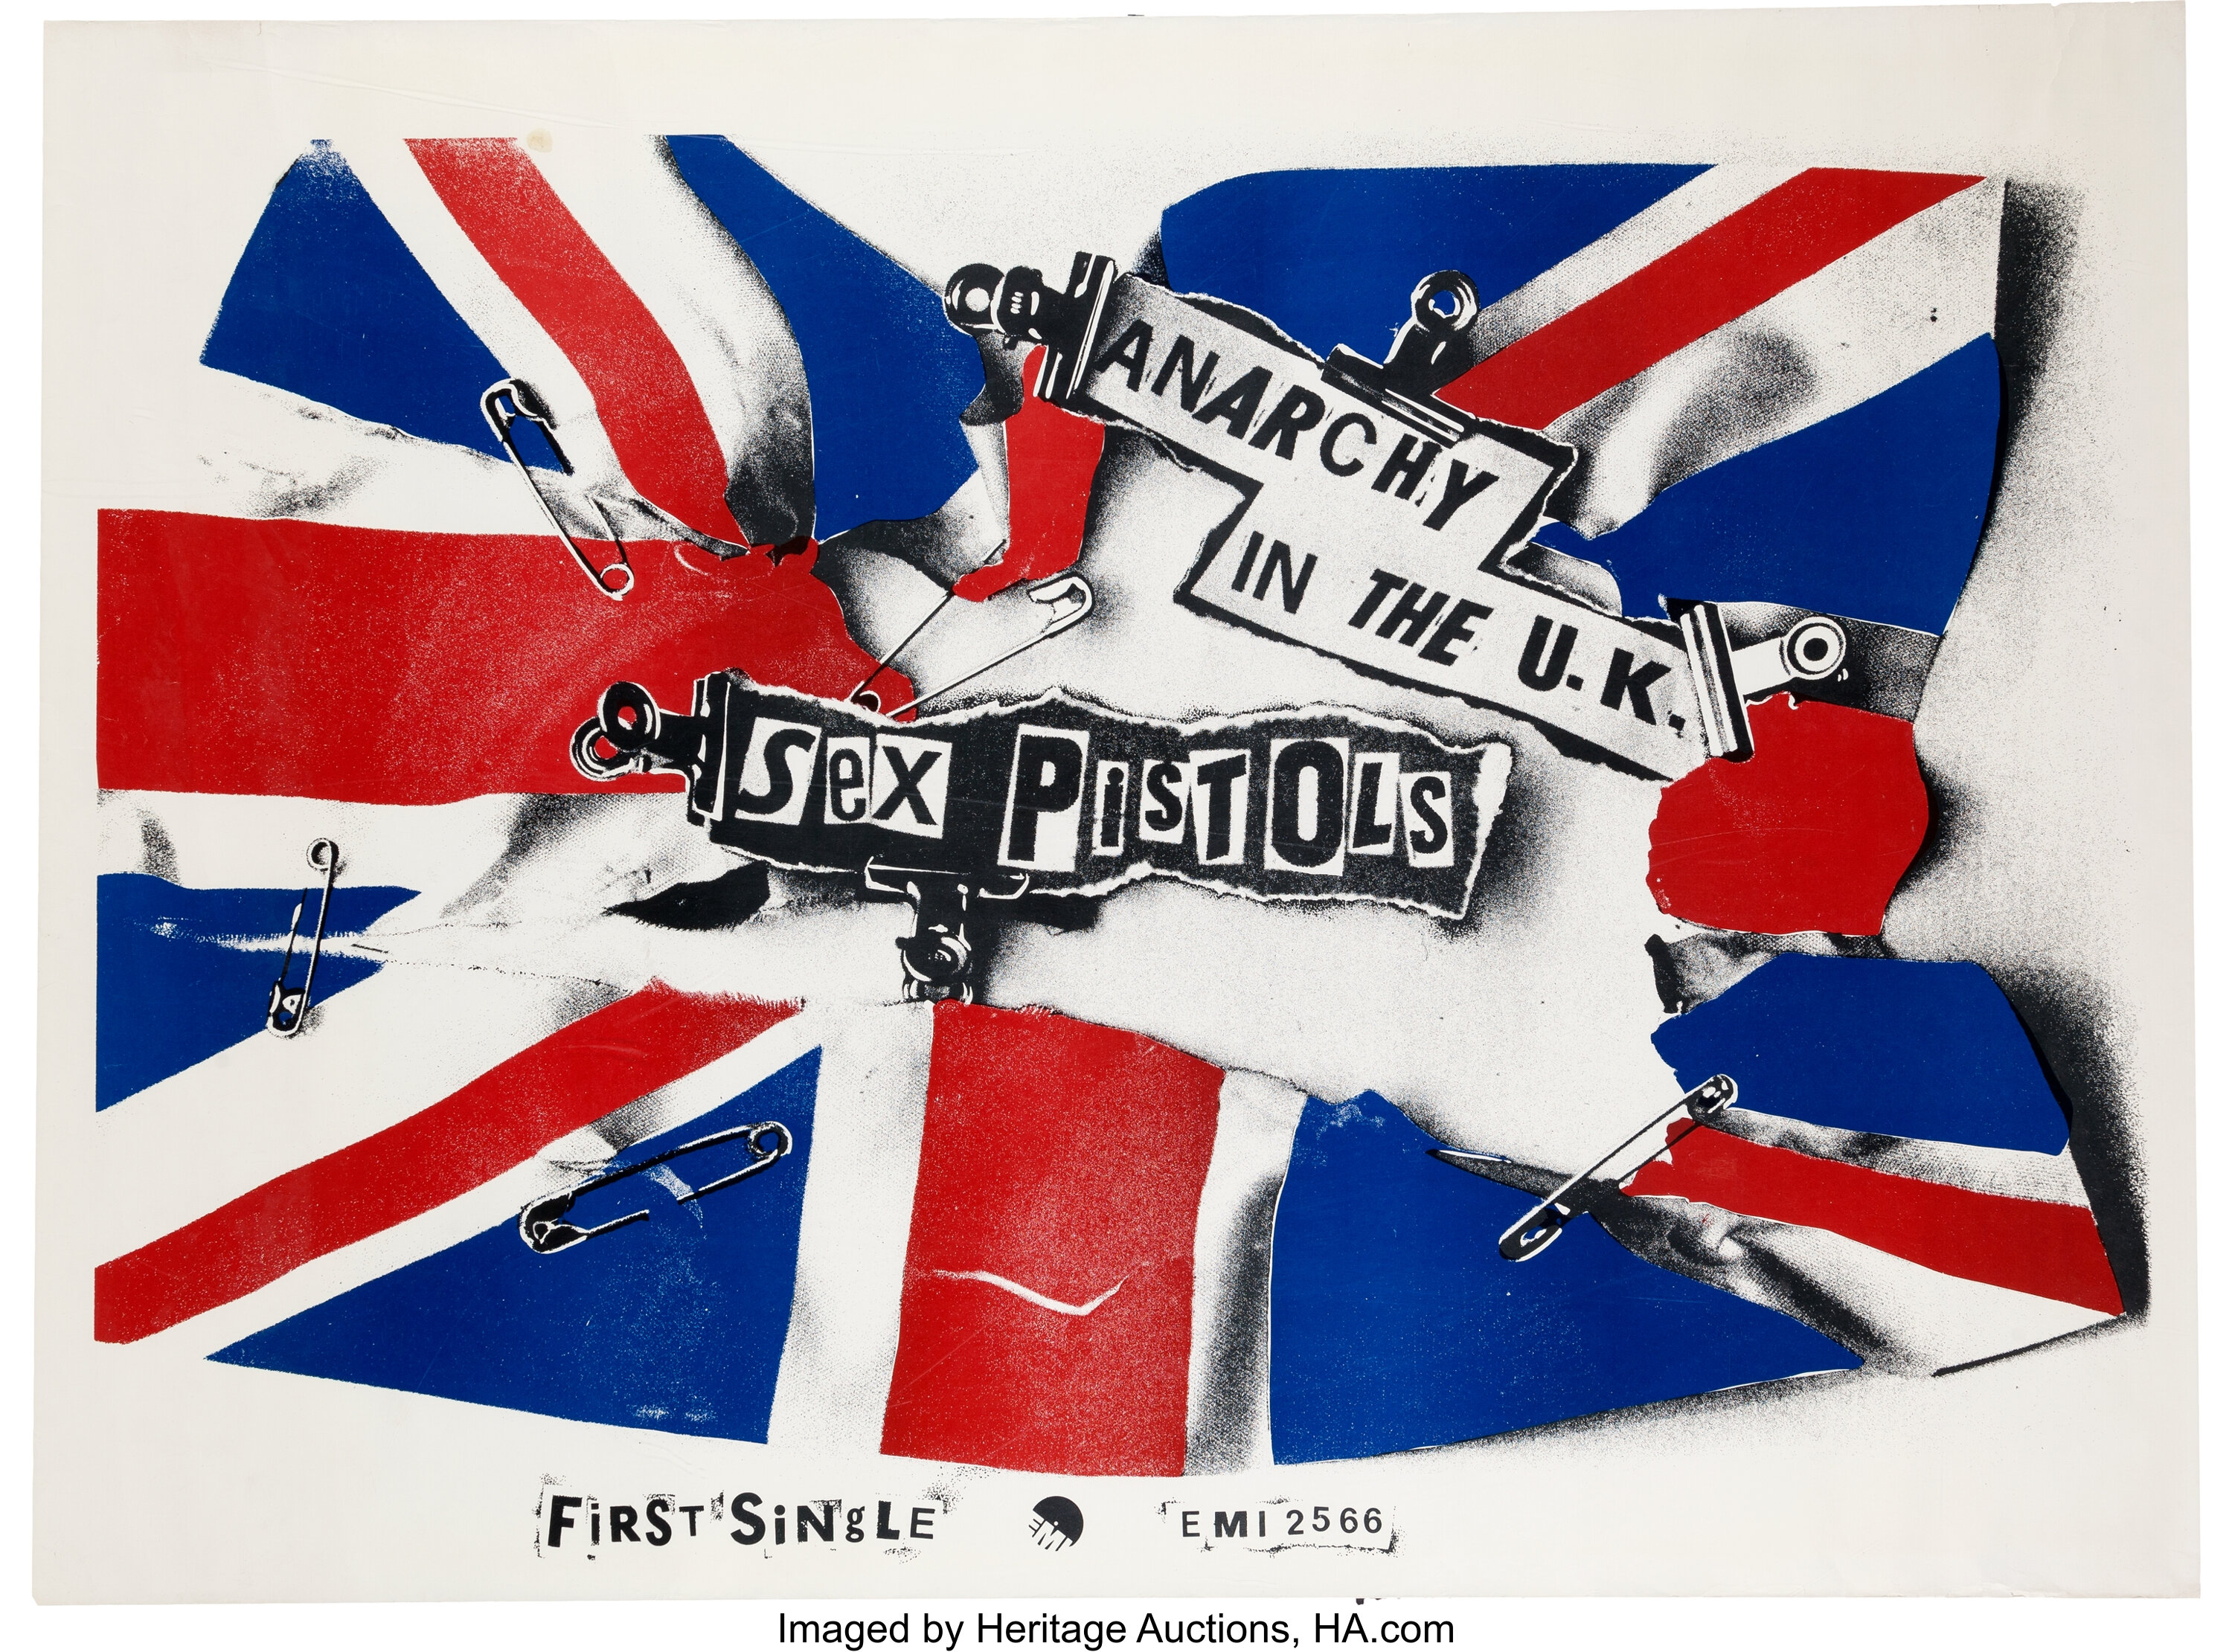 Sex Pistols Anarchy In The Uk Promo Poster Emi 1976 Music Lot 311 Heritage Auctions